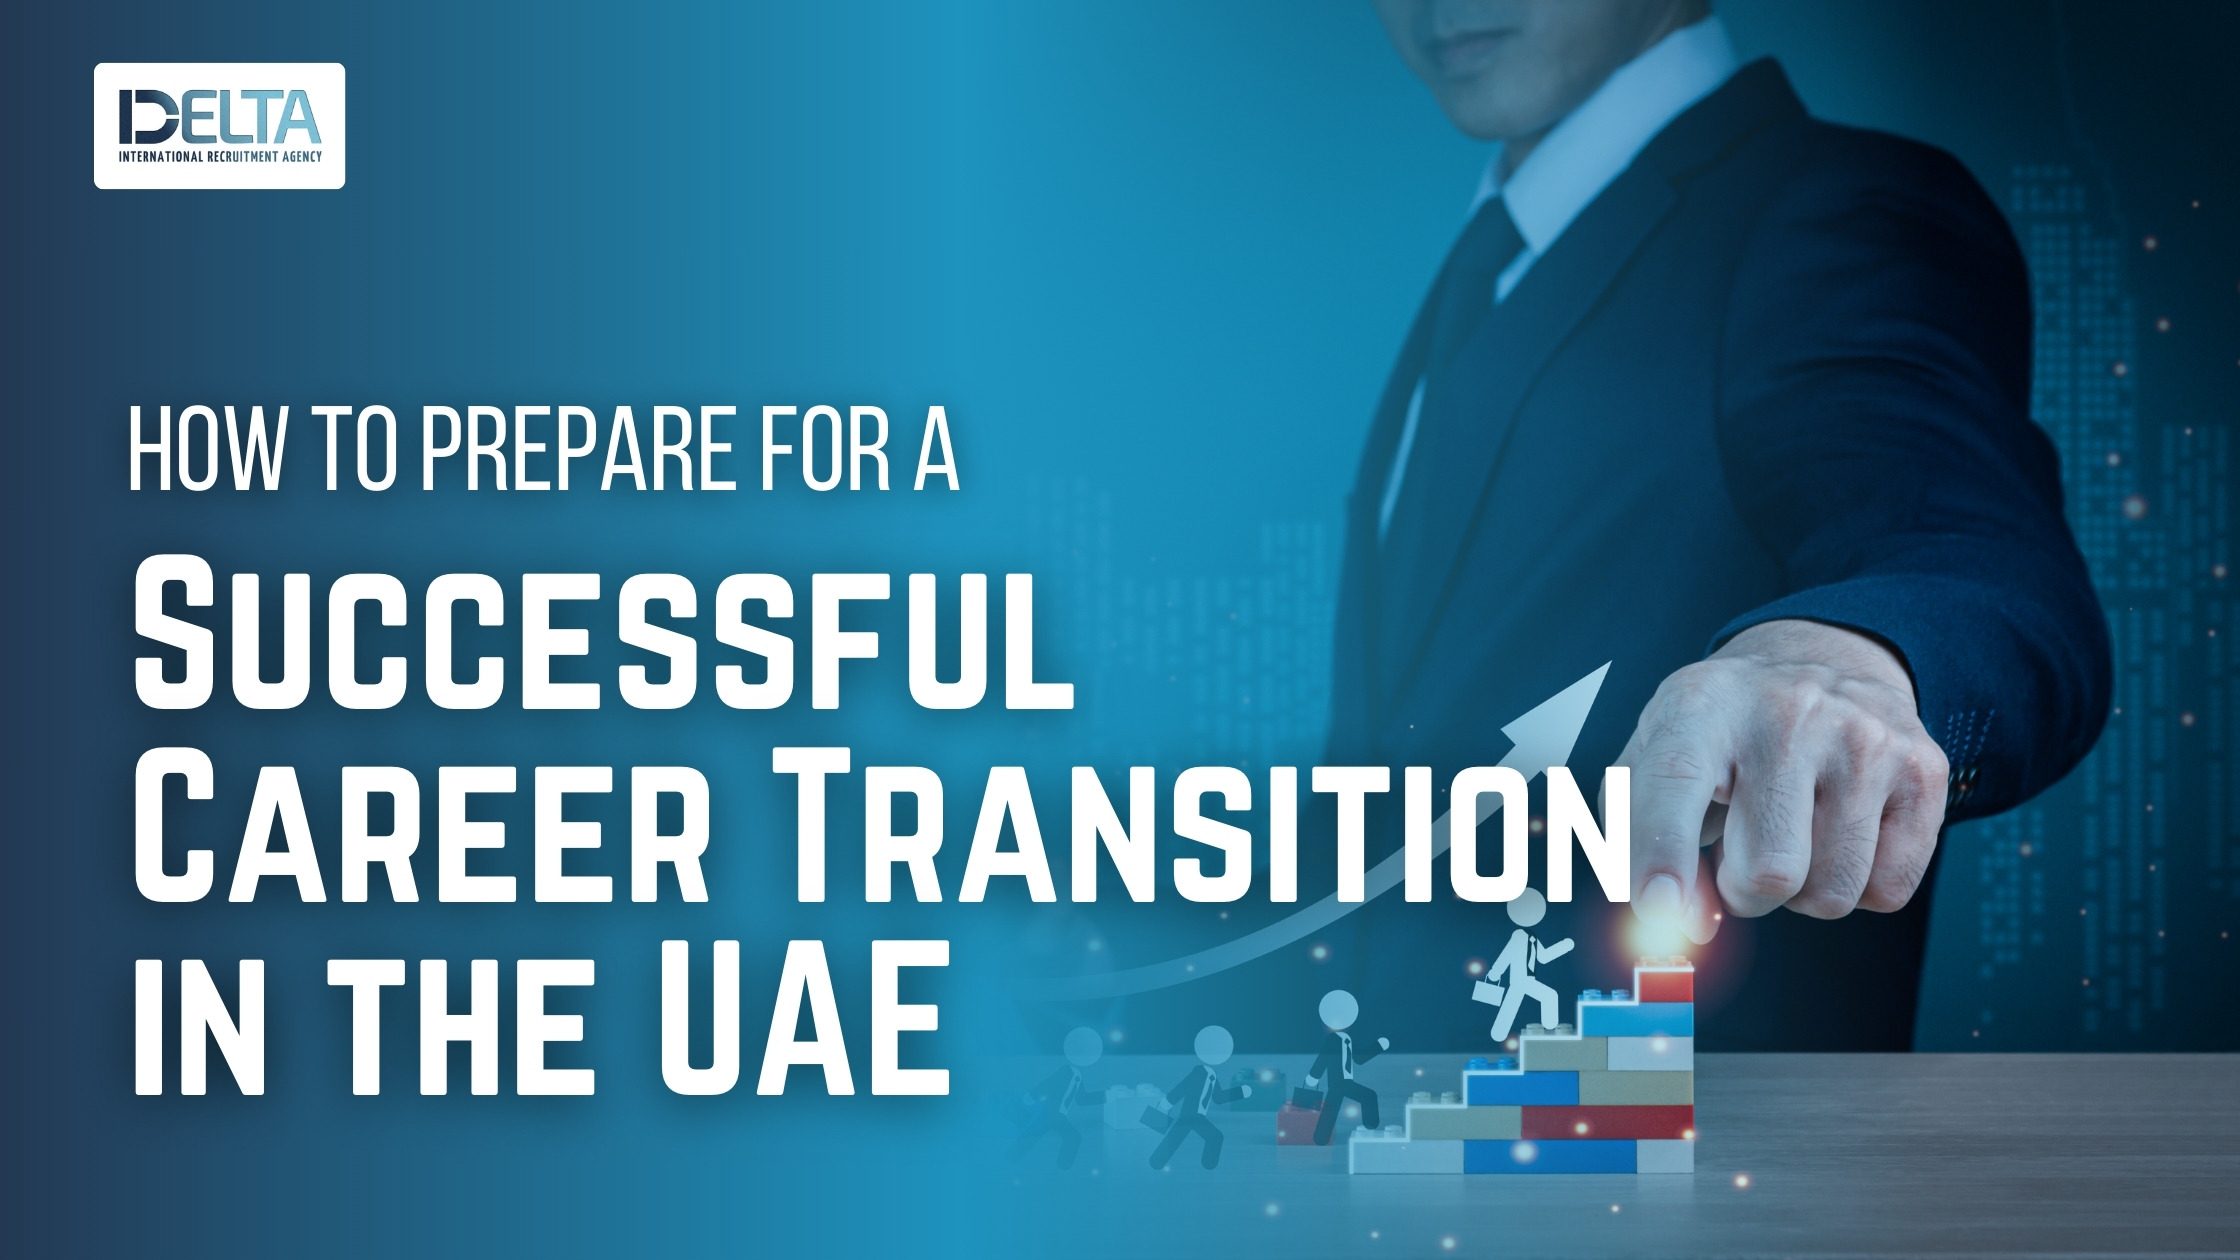 How to Prepare for a Successful Career Transition in the UAE?